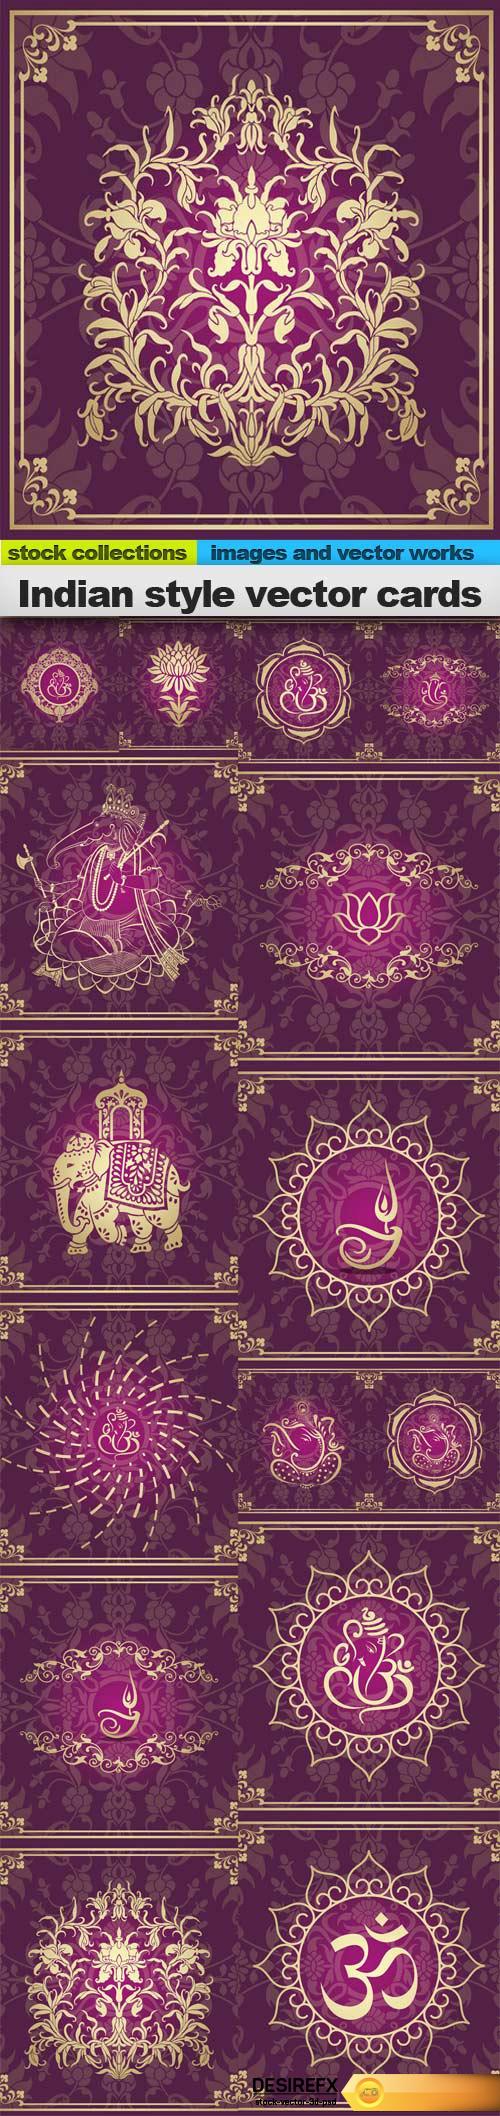 Indian style vector cards, 15 x EPS